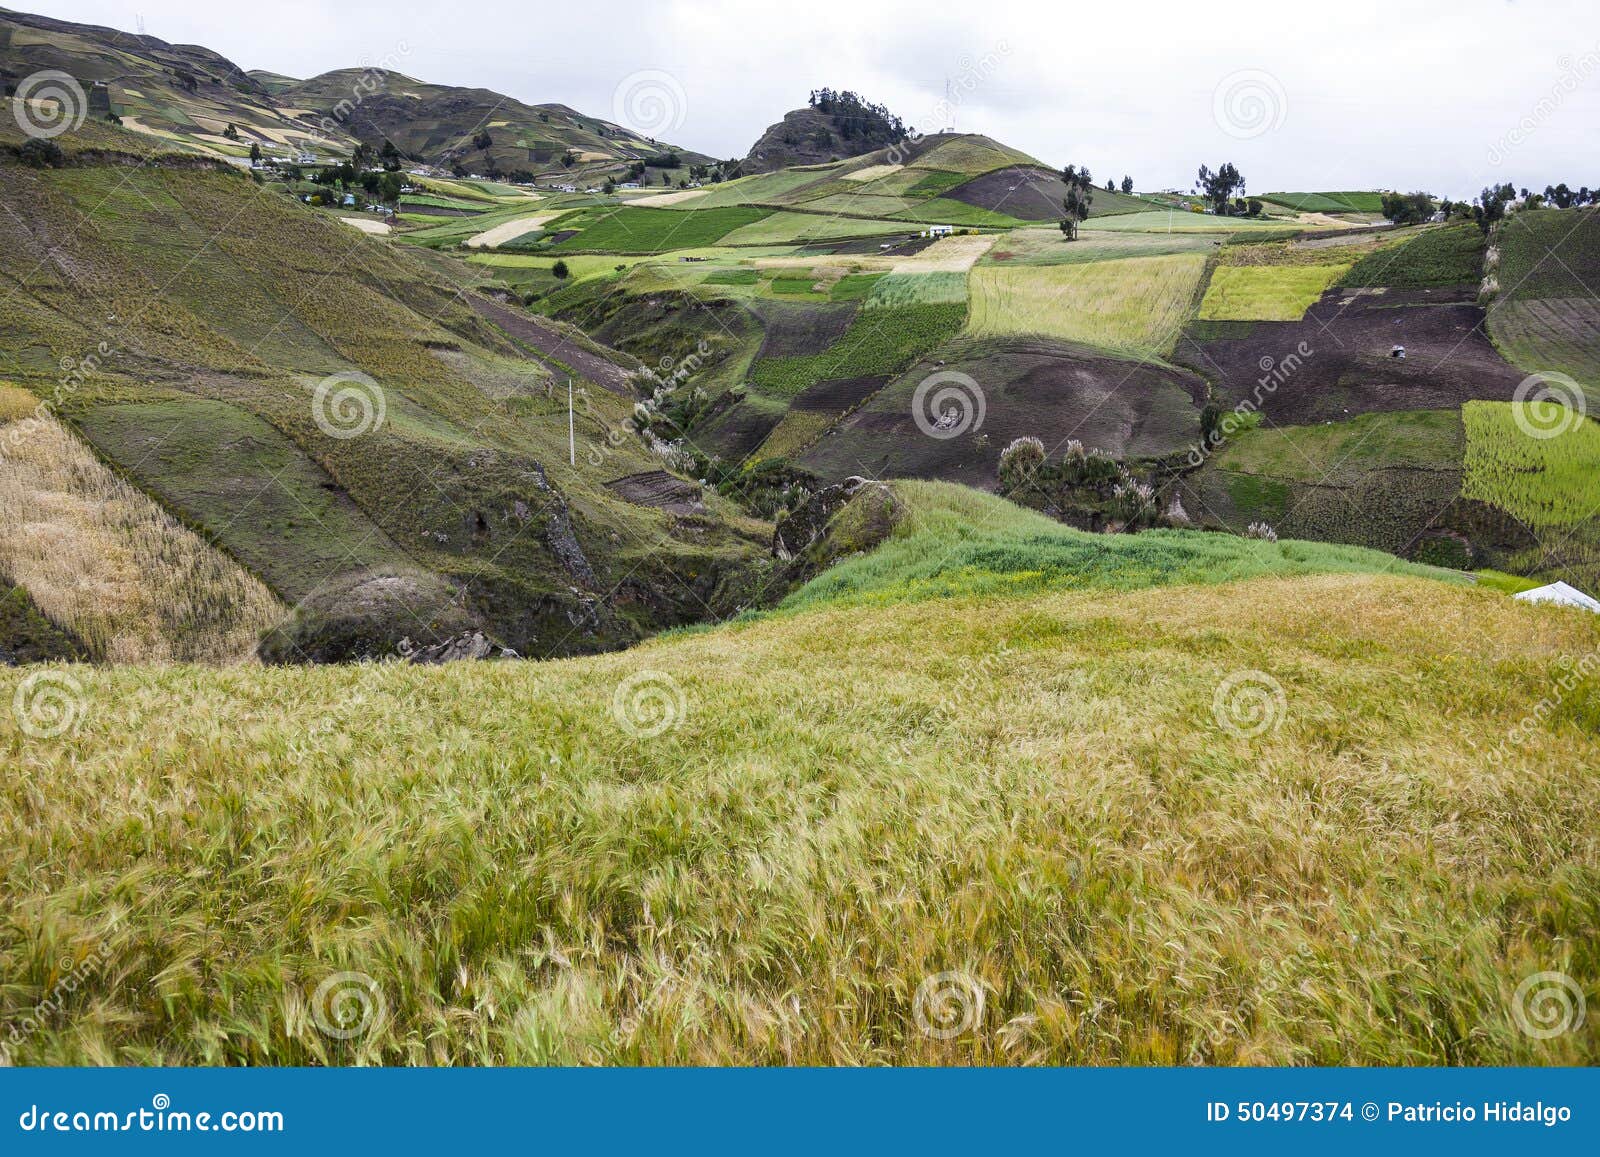 crops of barley and colorful slopes near zumbahua